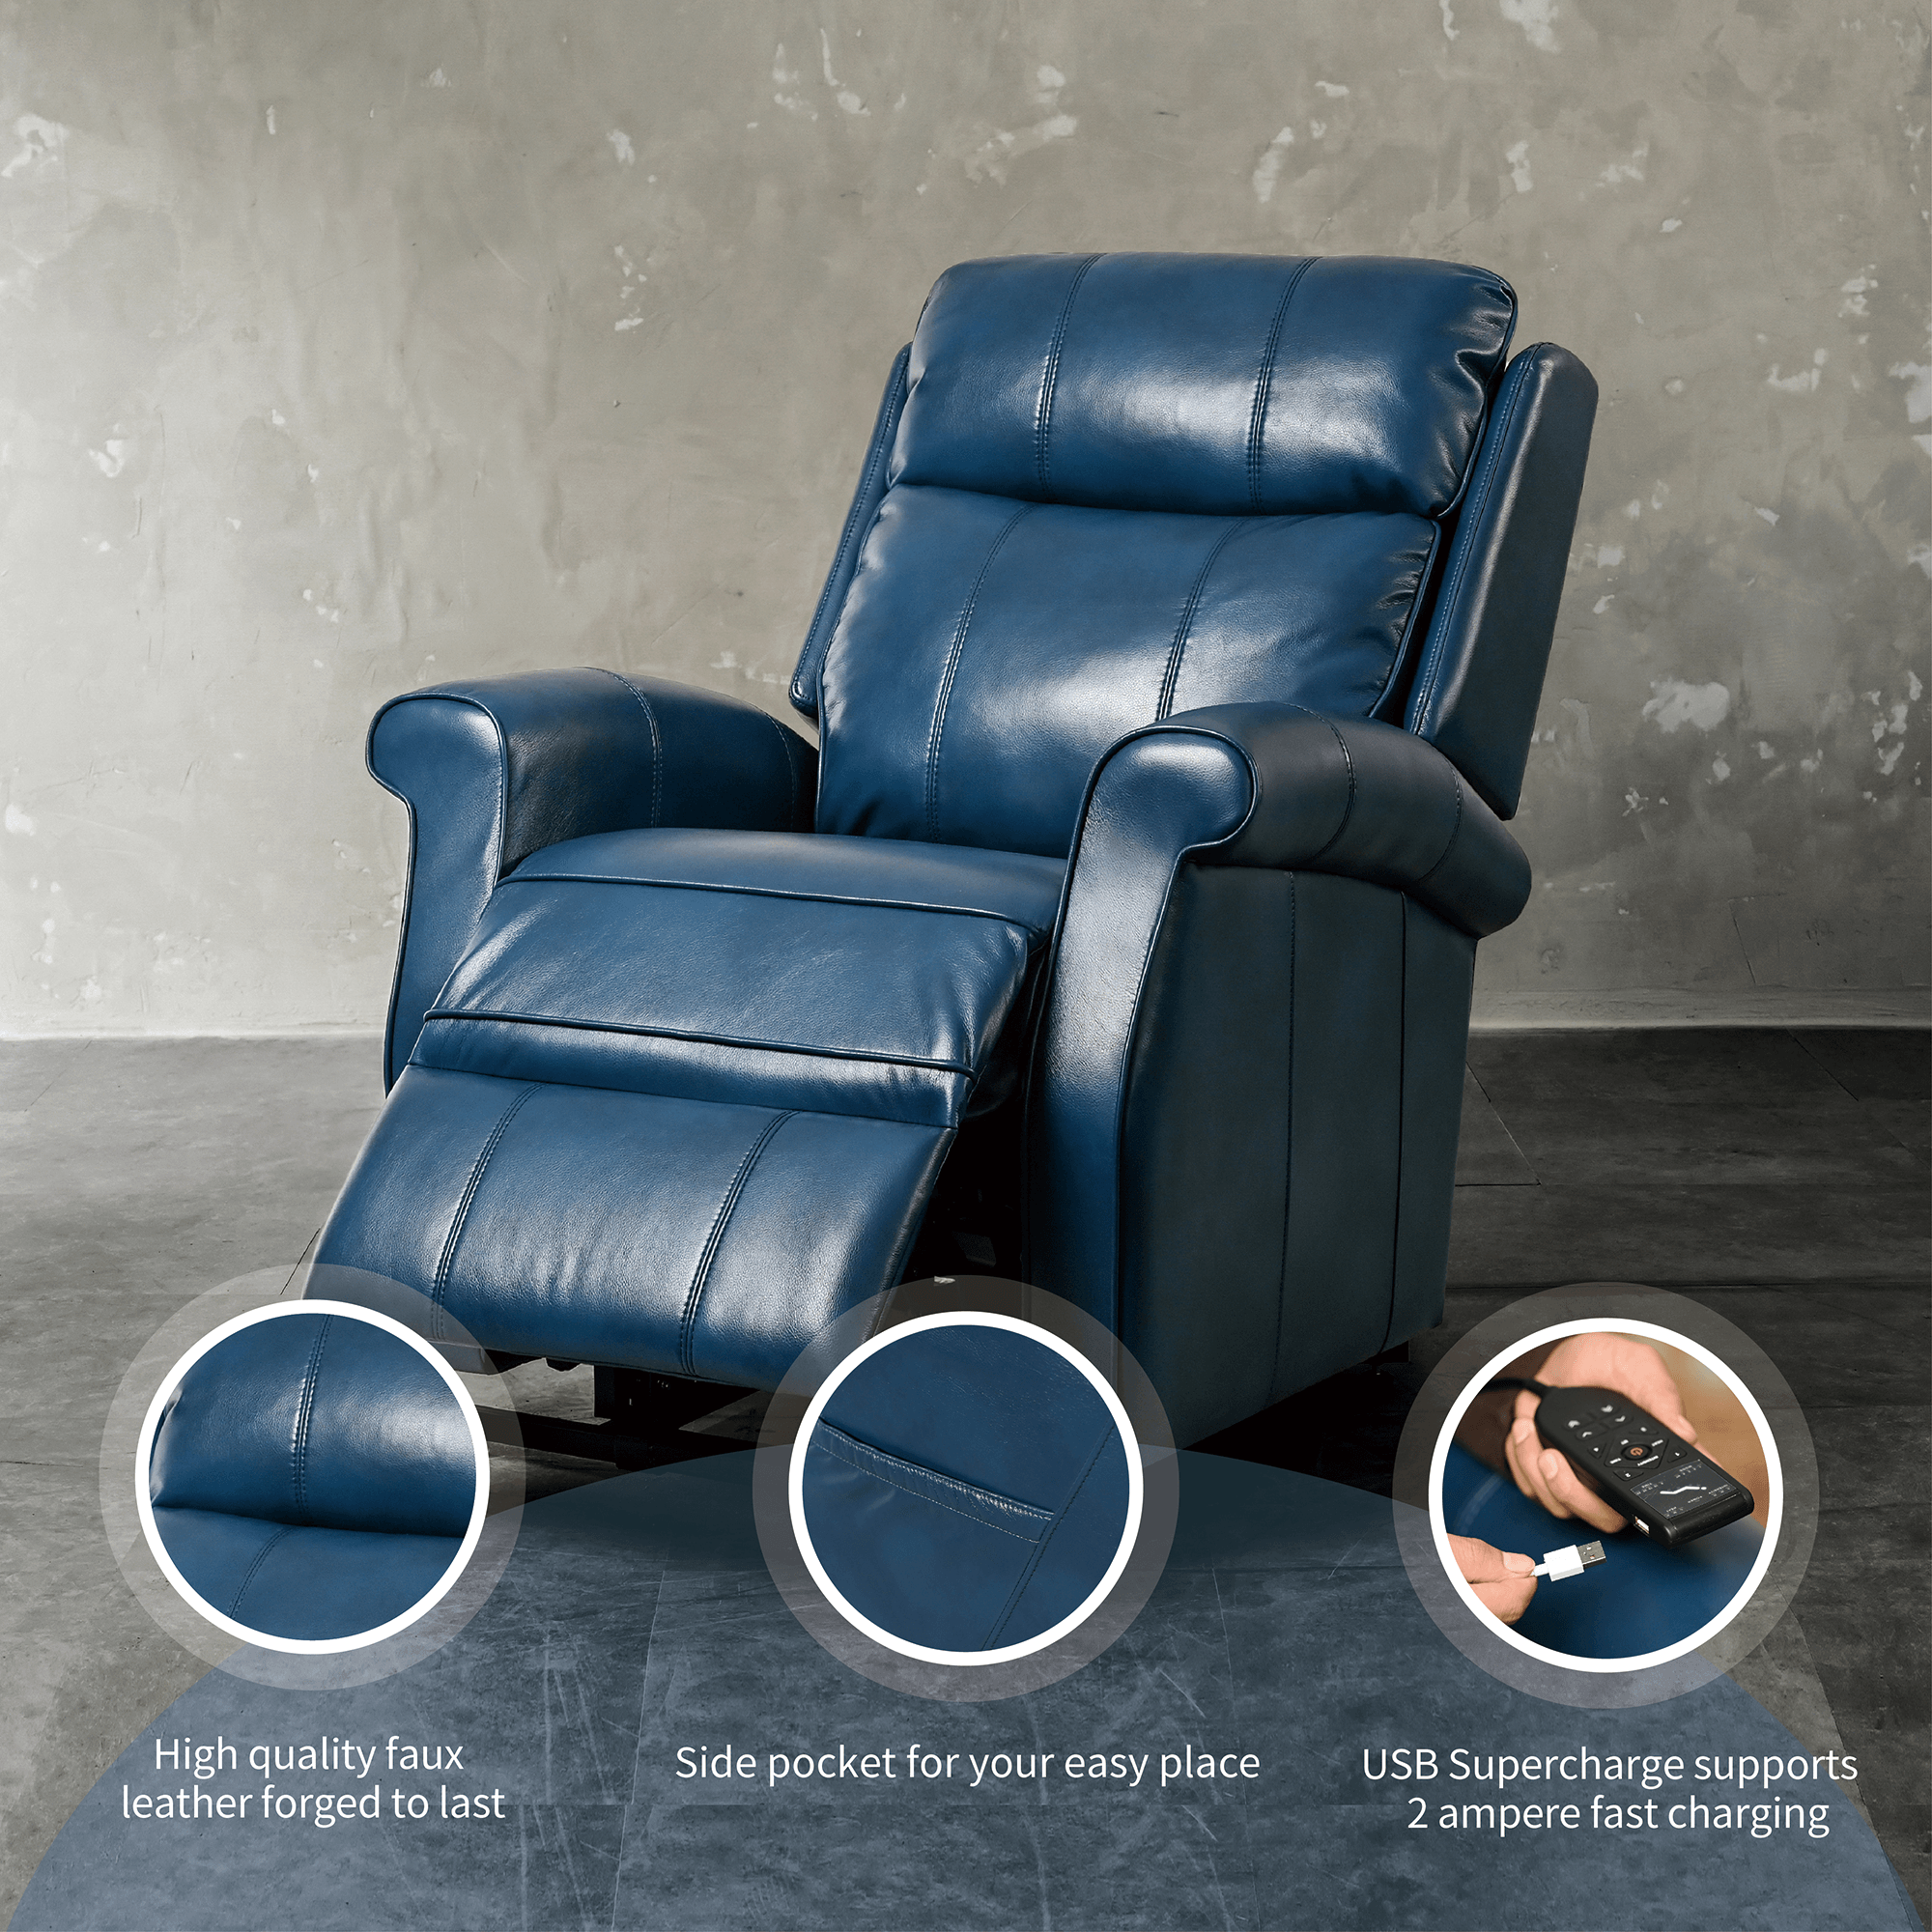 Lift Chair Recliner with Massage and Heat, Blue with Stitching